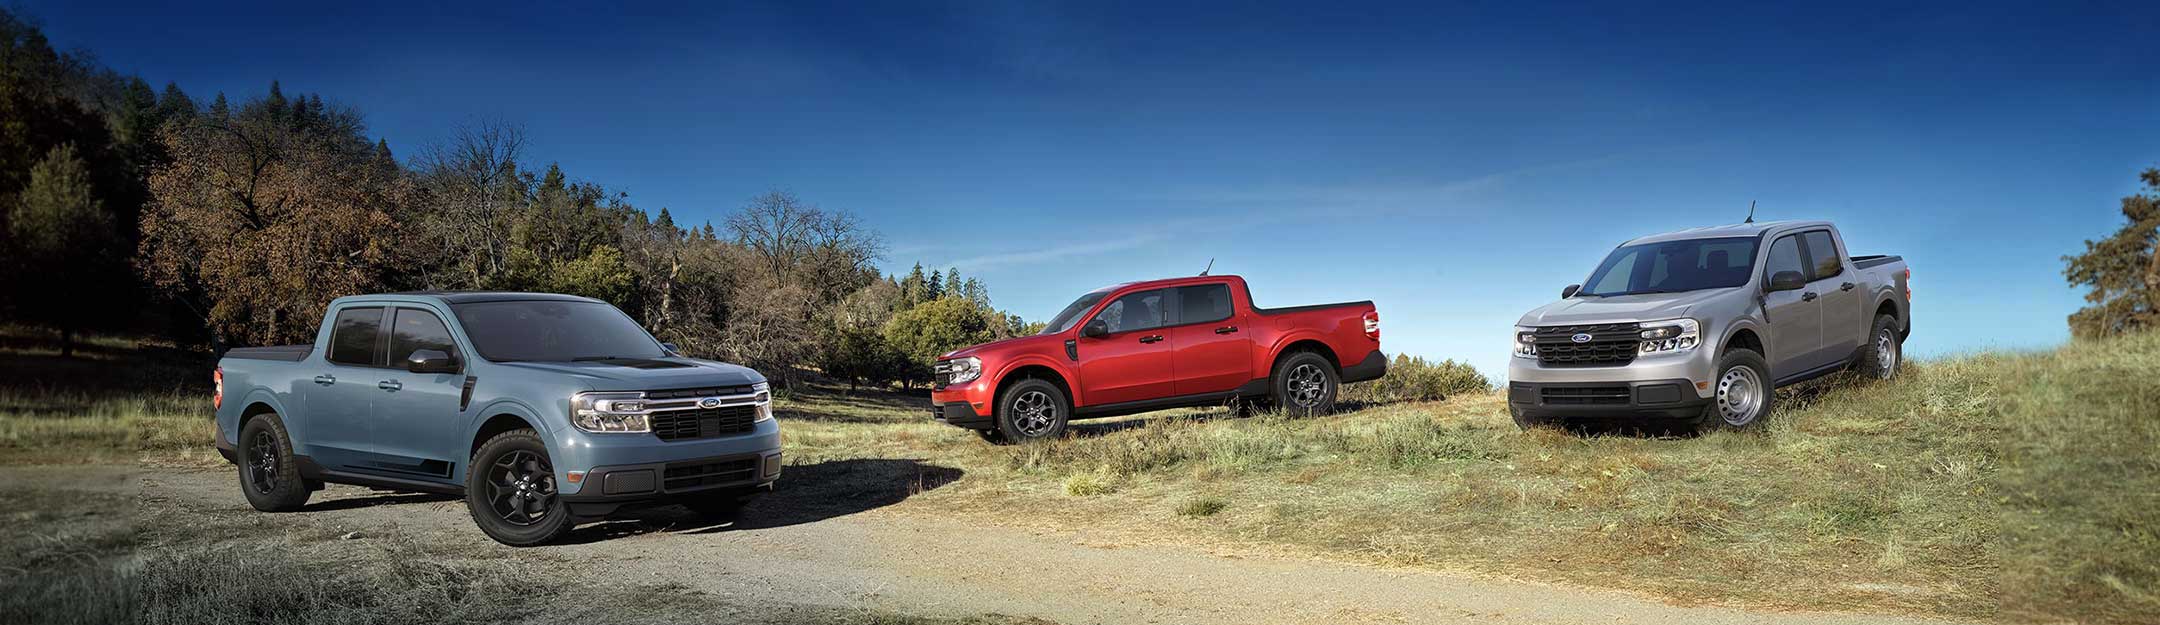 The All-New Ford Maverick Truck Is Here